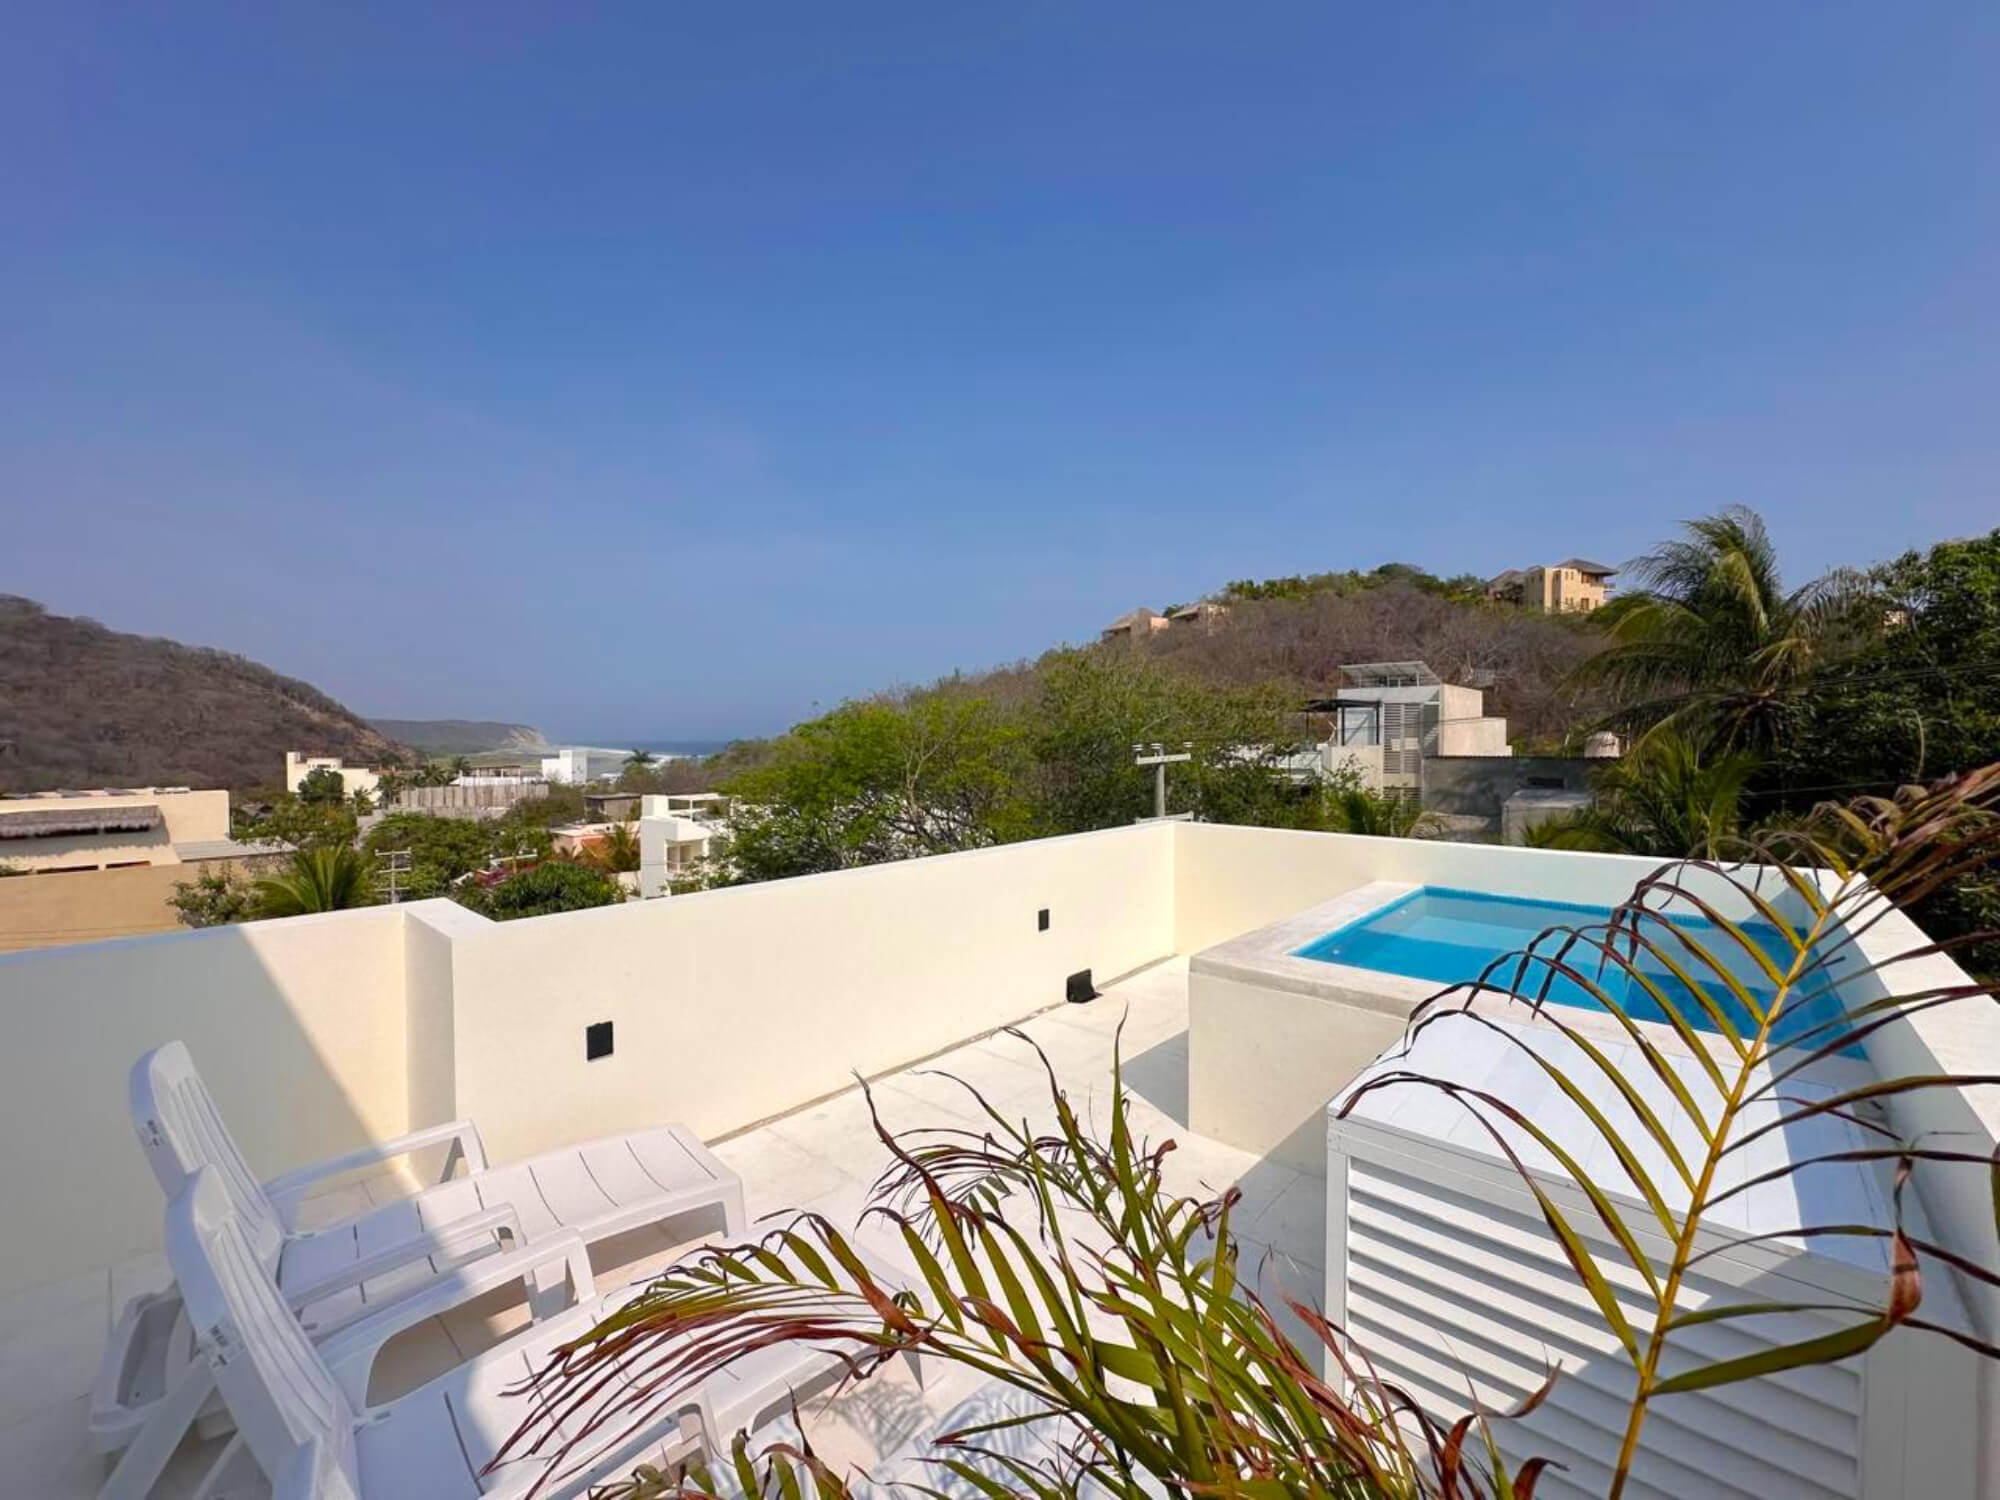 House with ocean view terrace, elevator, solar panel, private pool, 780 m2 land, in gated community “Residencial Conejos”, for sale Huatulco